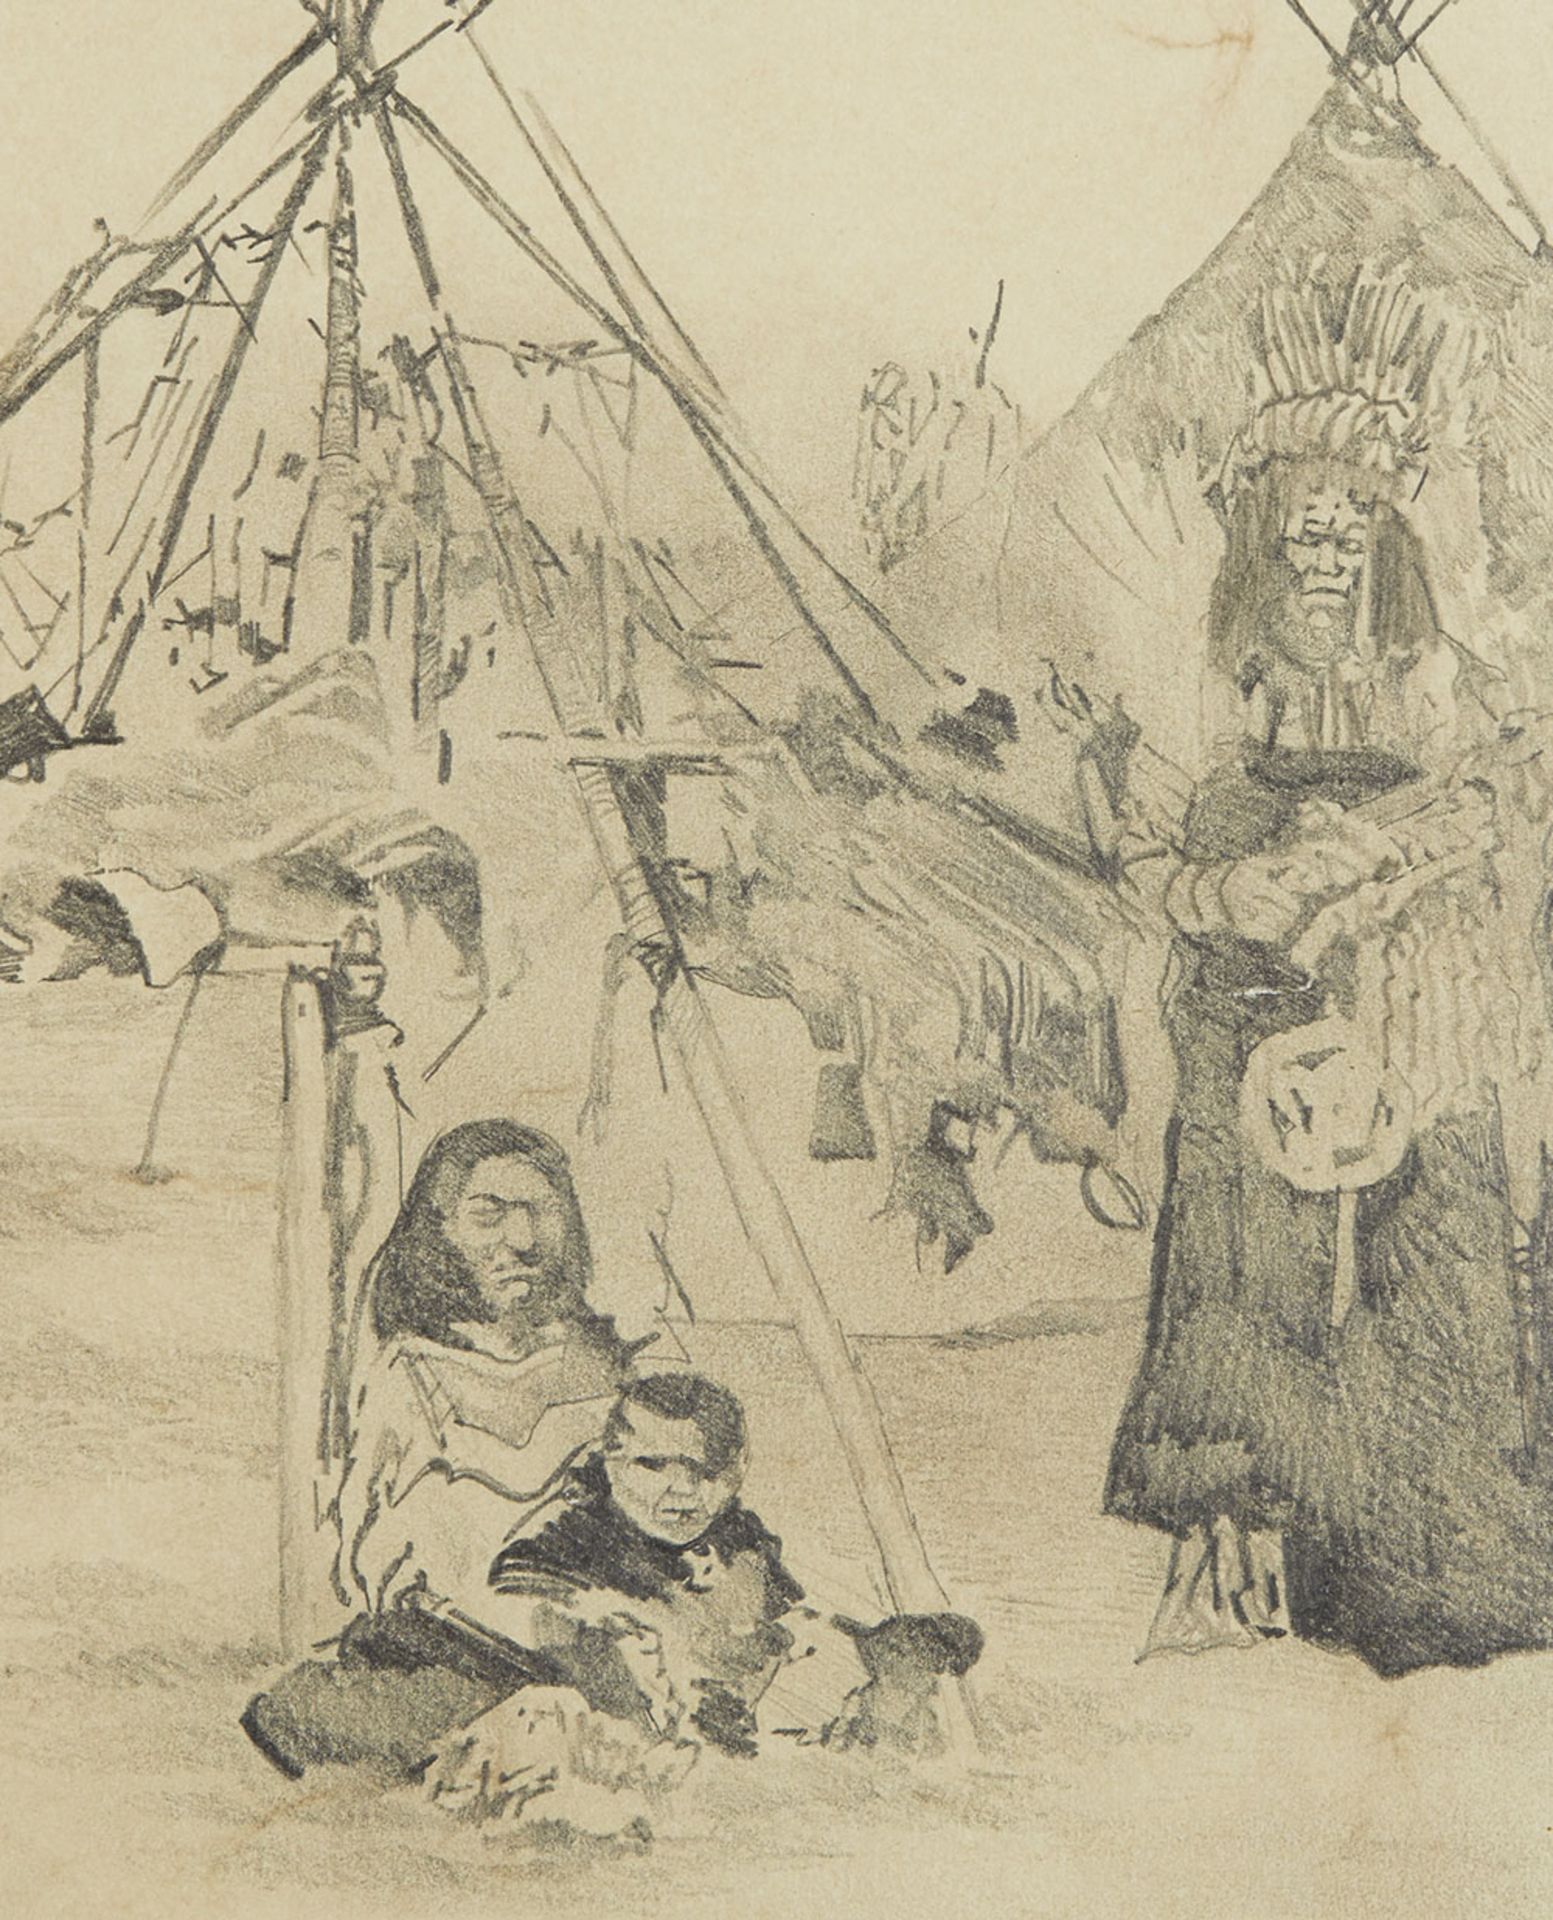 Campaign Drawing Of Native American Reservation 19Th/20Th C. - Image 3 of 5